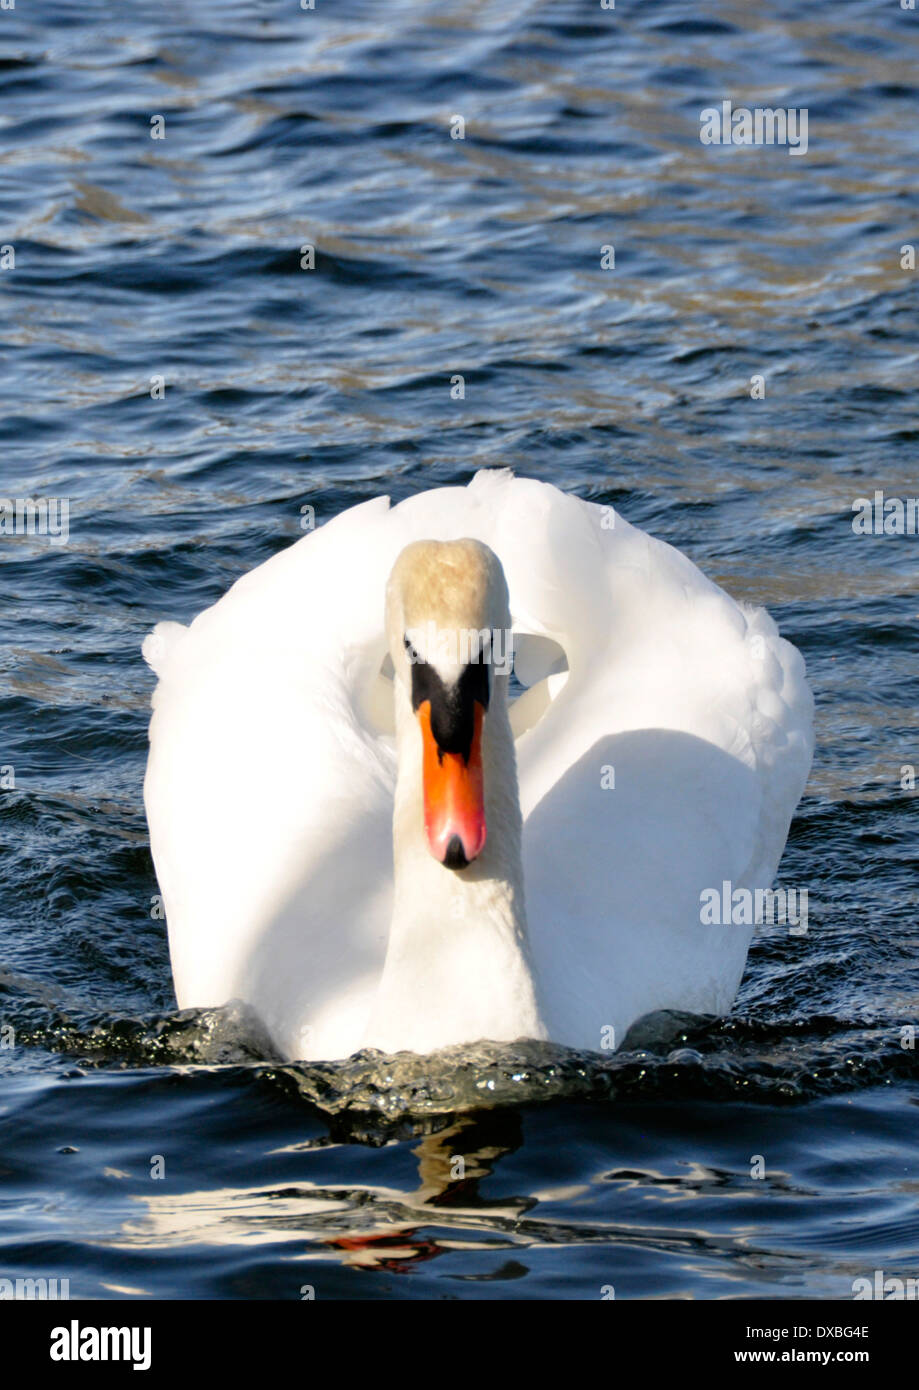 Adult swan full plumage - approaching at speed - bow wave - aggressive posture - bright sunlight - dark rippling waters Stock Photo